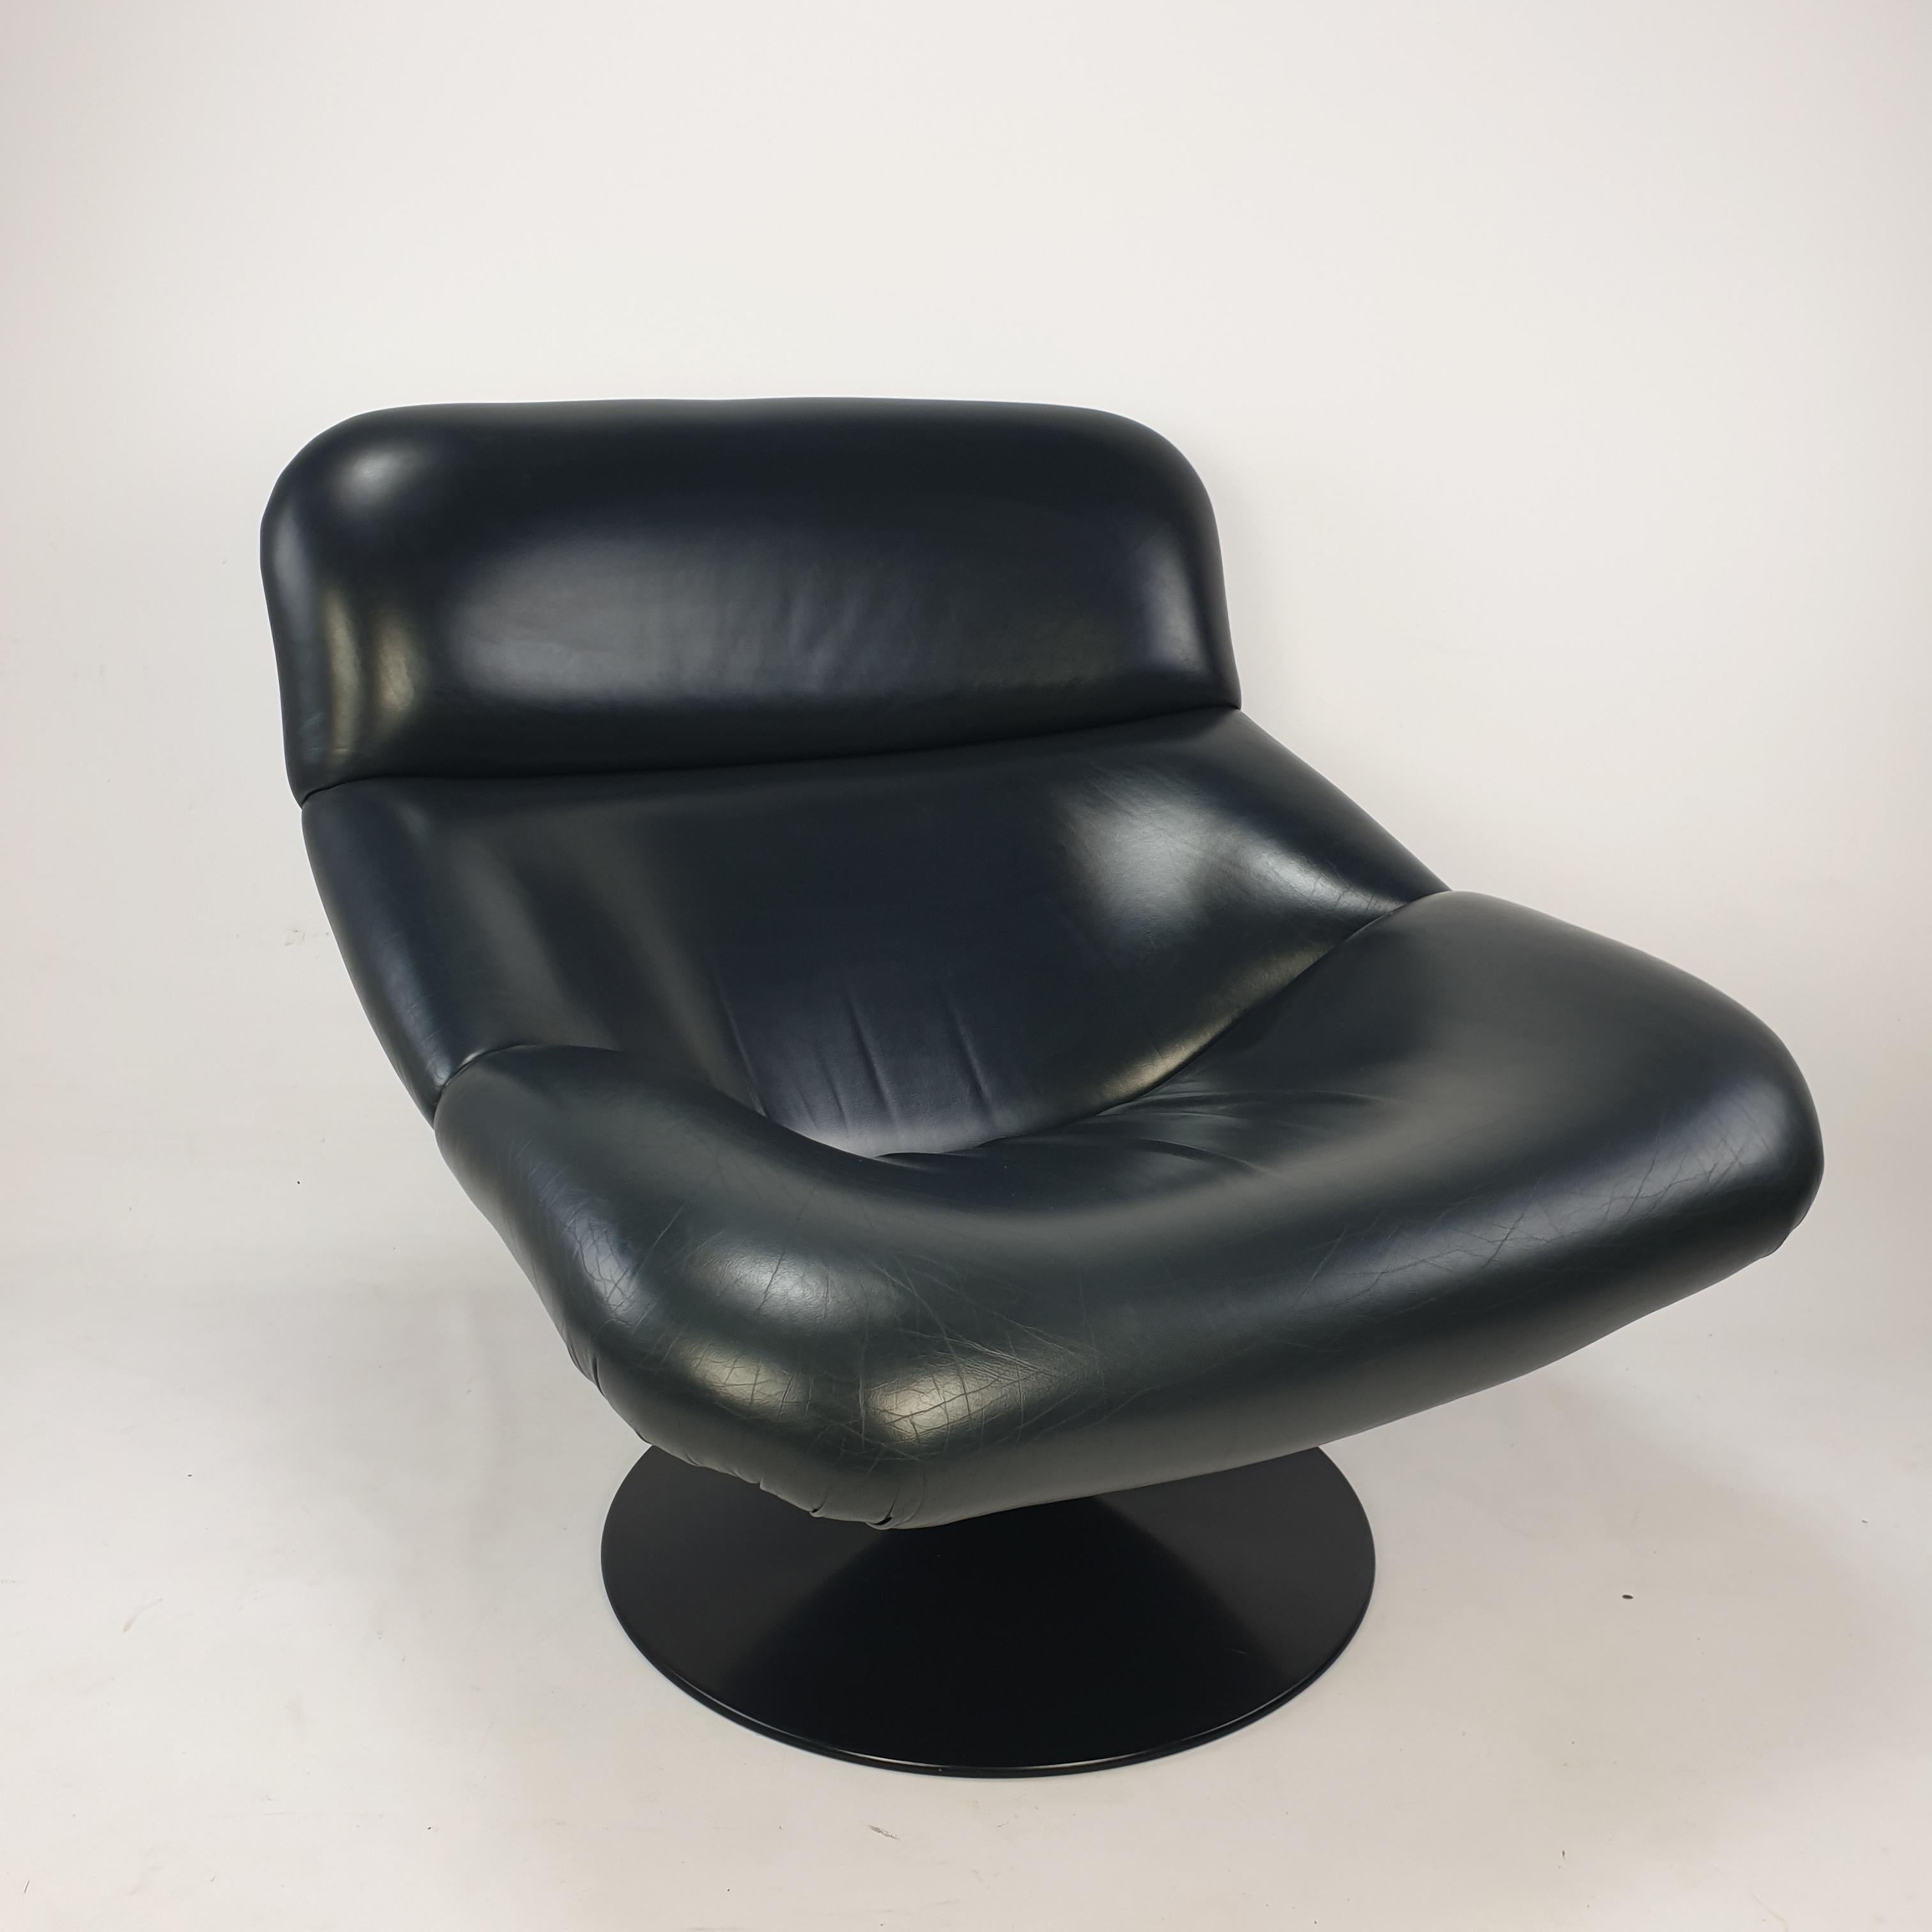 Extremely comfortable pivoting Artifort lounge chair, named F518. Designed by the famous English designer Geoffrey Harcourt in the 70’s. The high quality leather is in very good condition and has a very nice patina. The structure and the foam are